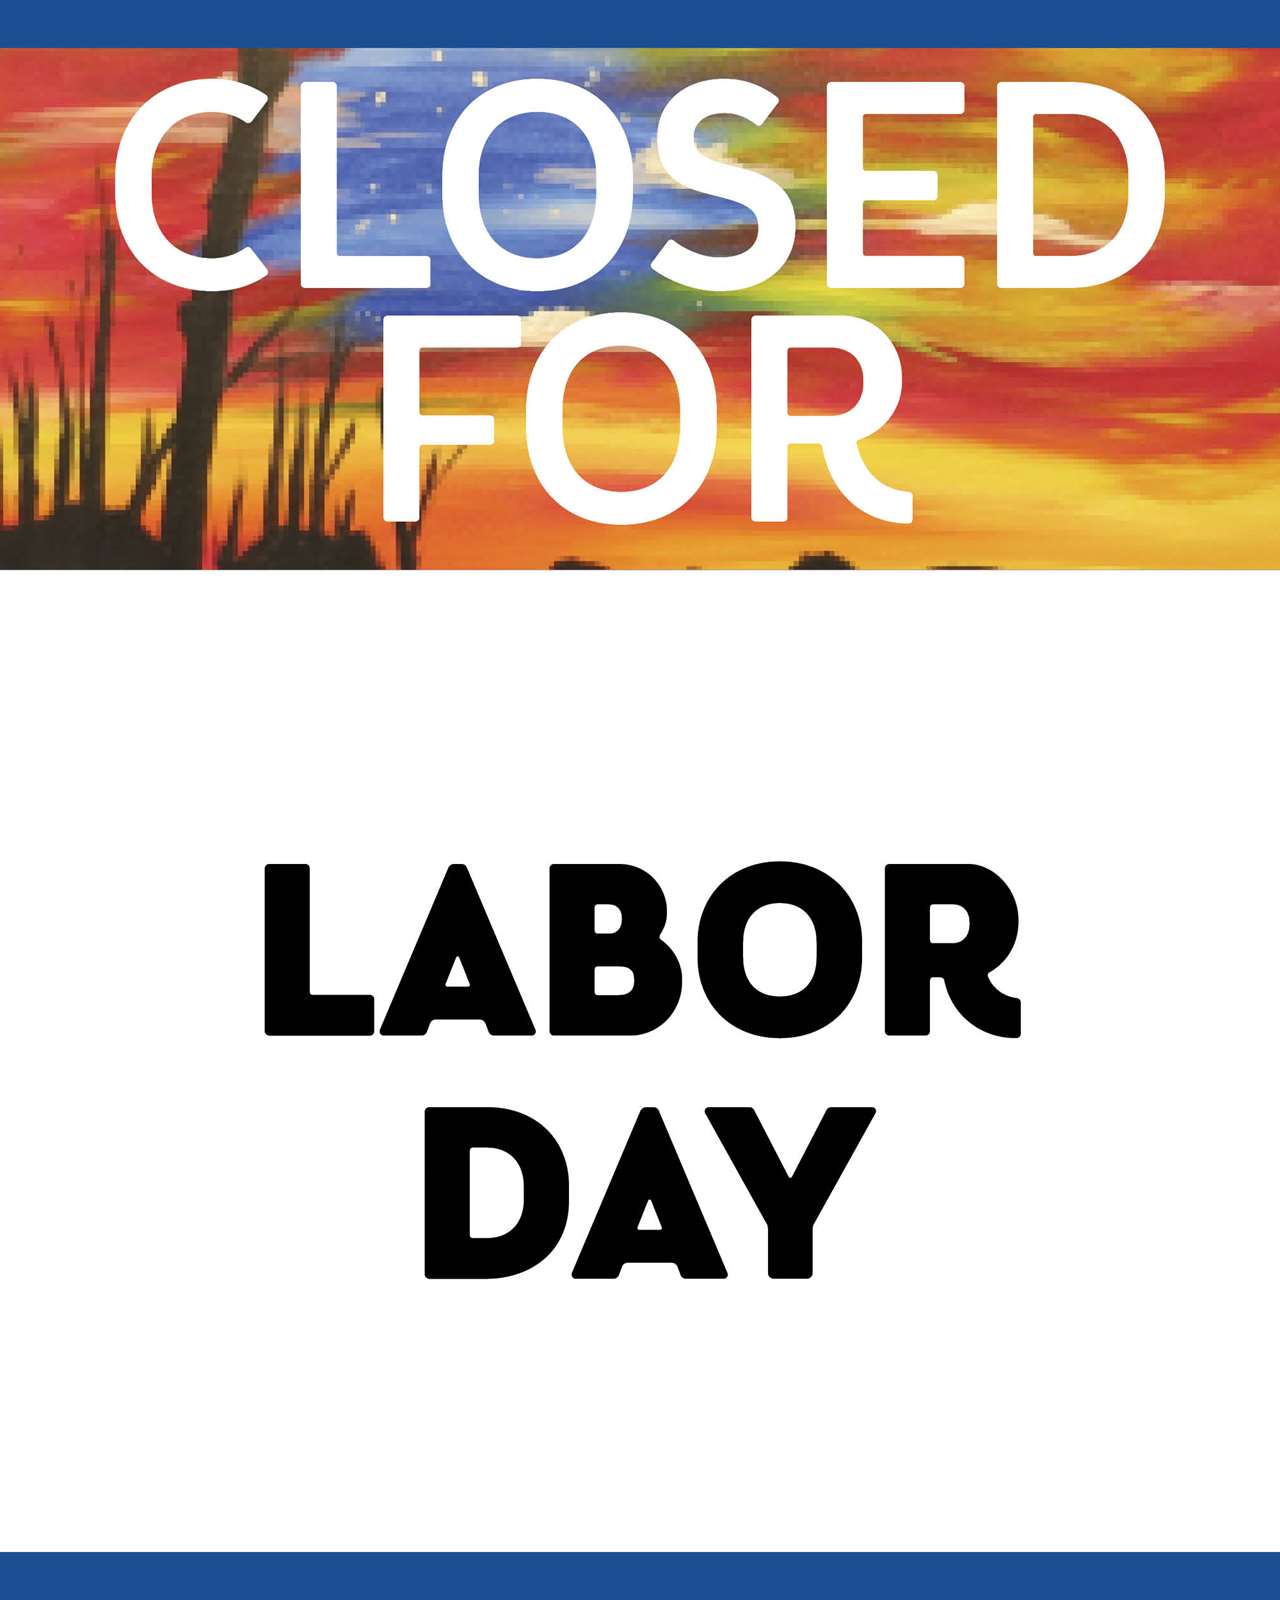 closed-for-labor-day-mon-sep-07-12am-at-logan-square